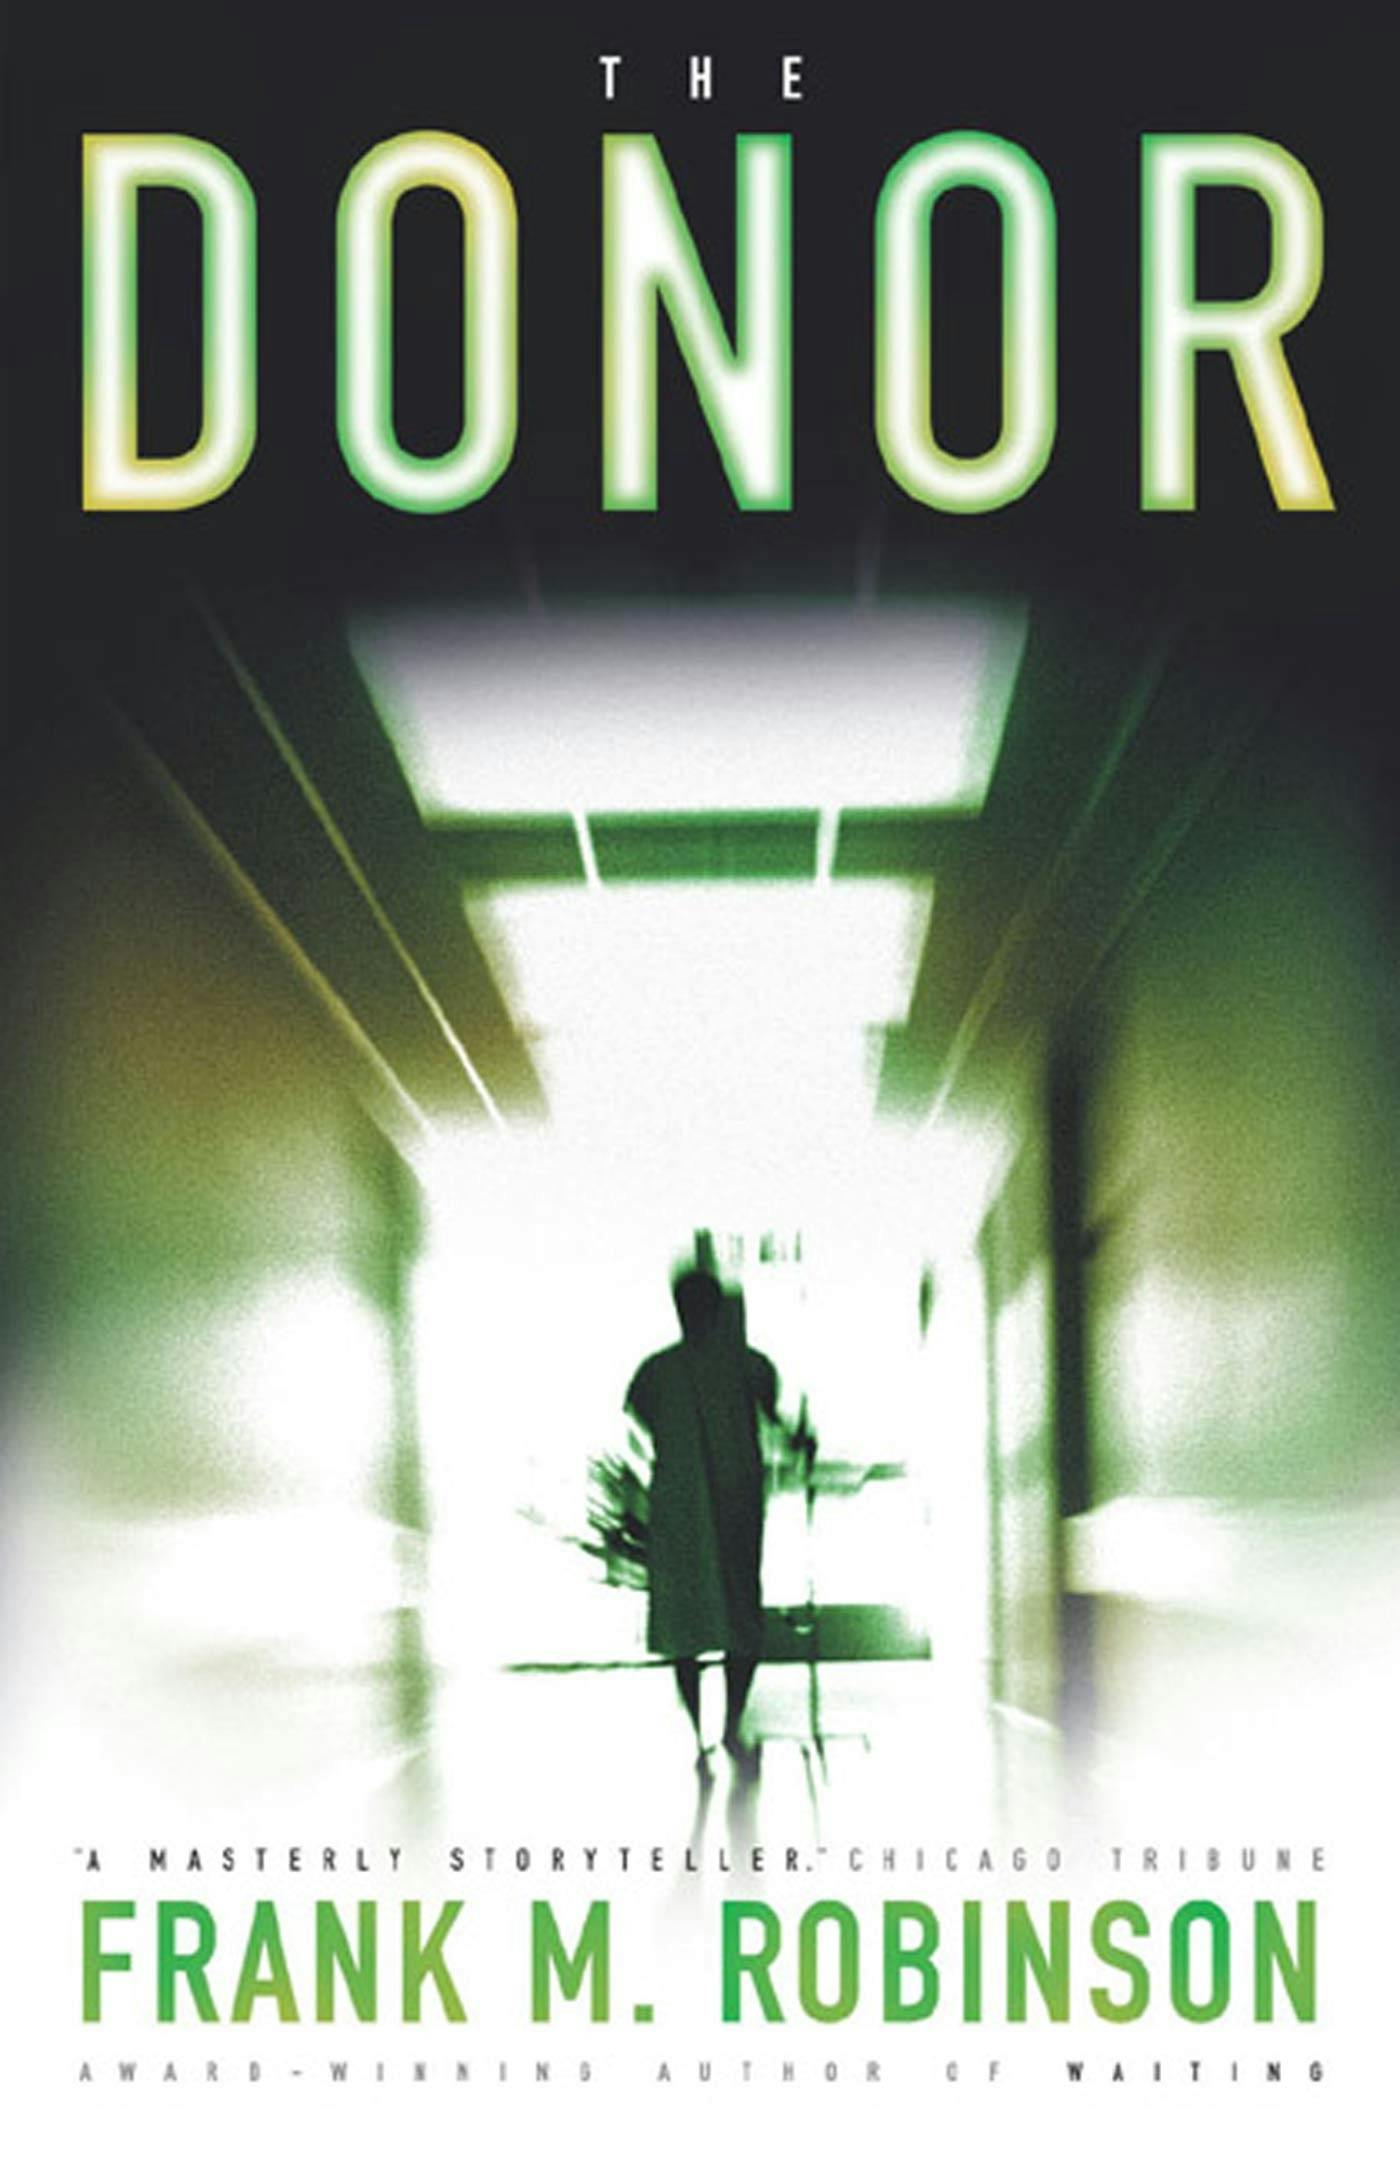 Cover for the book titled as: The Donor